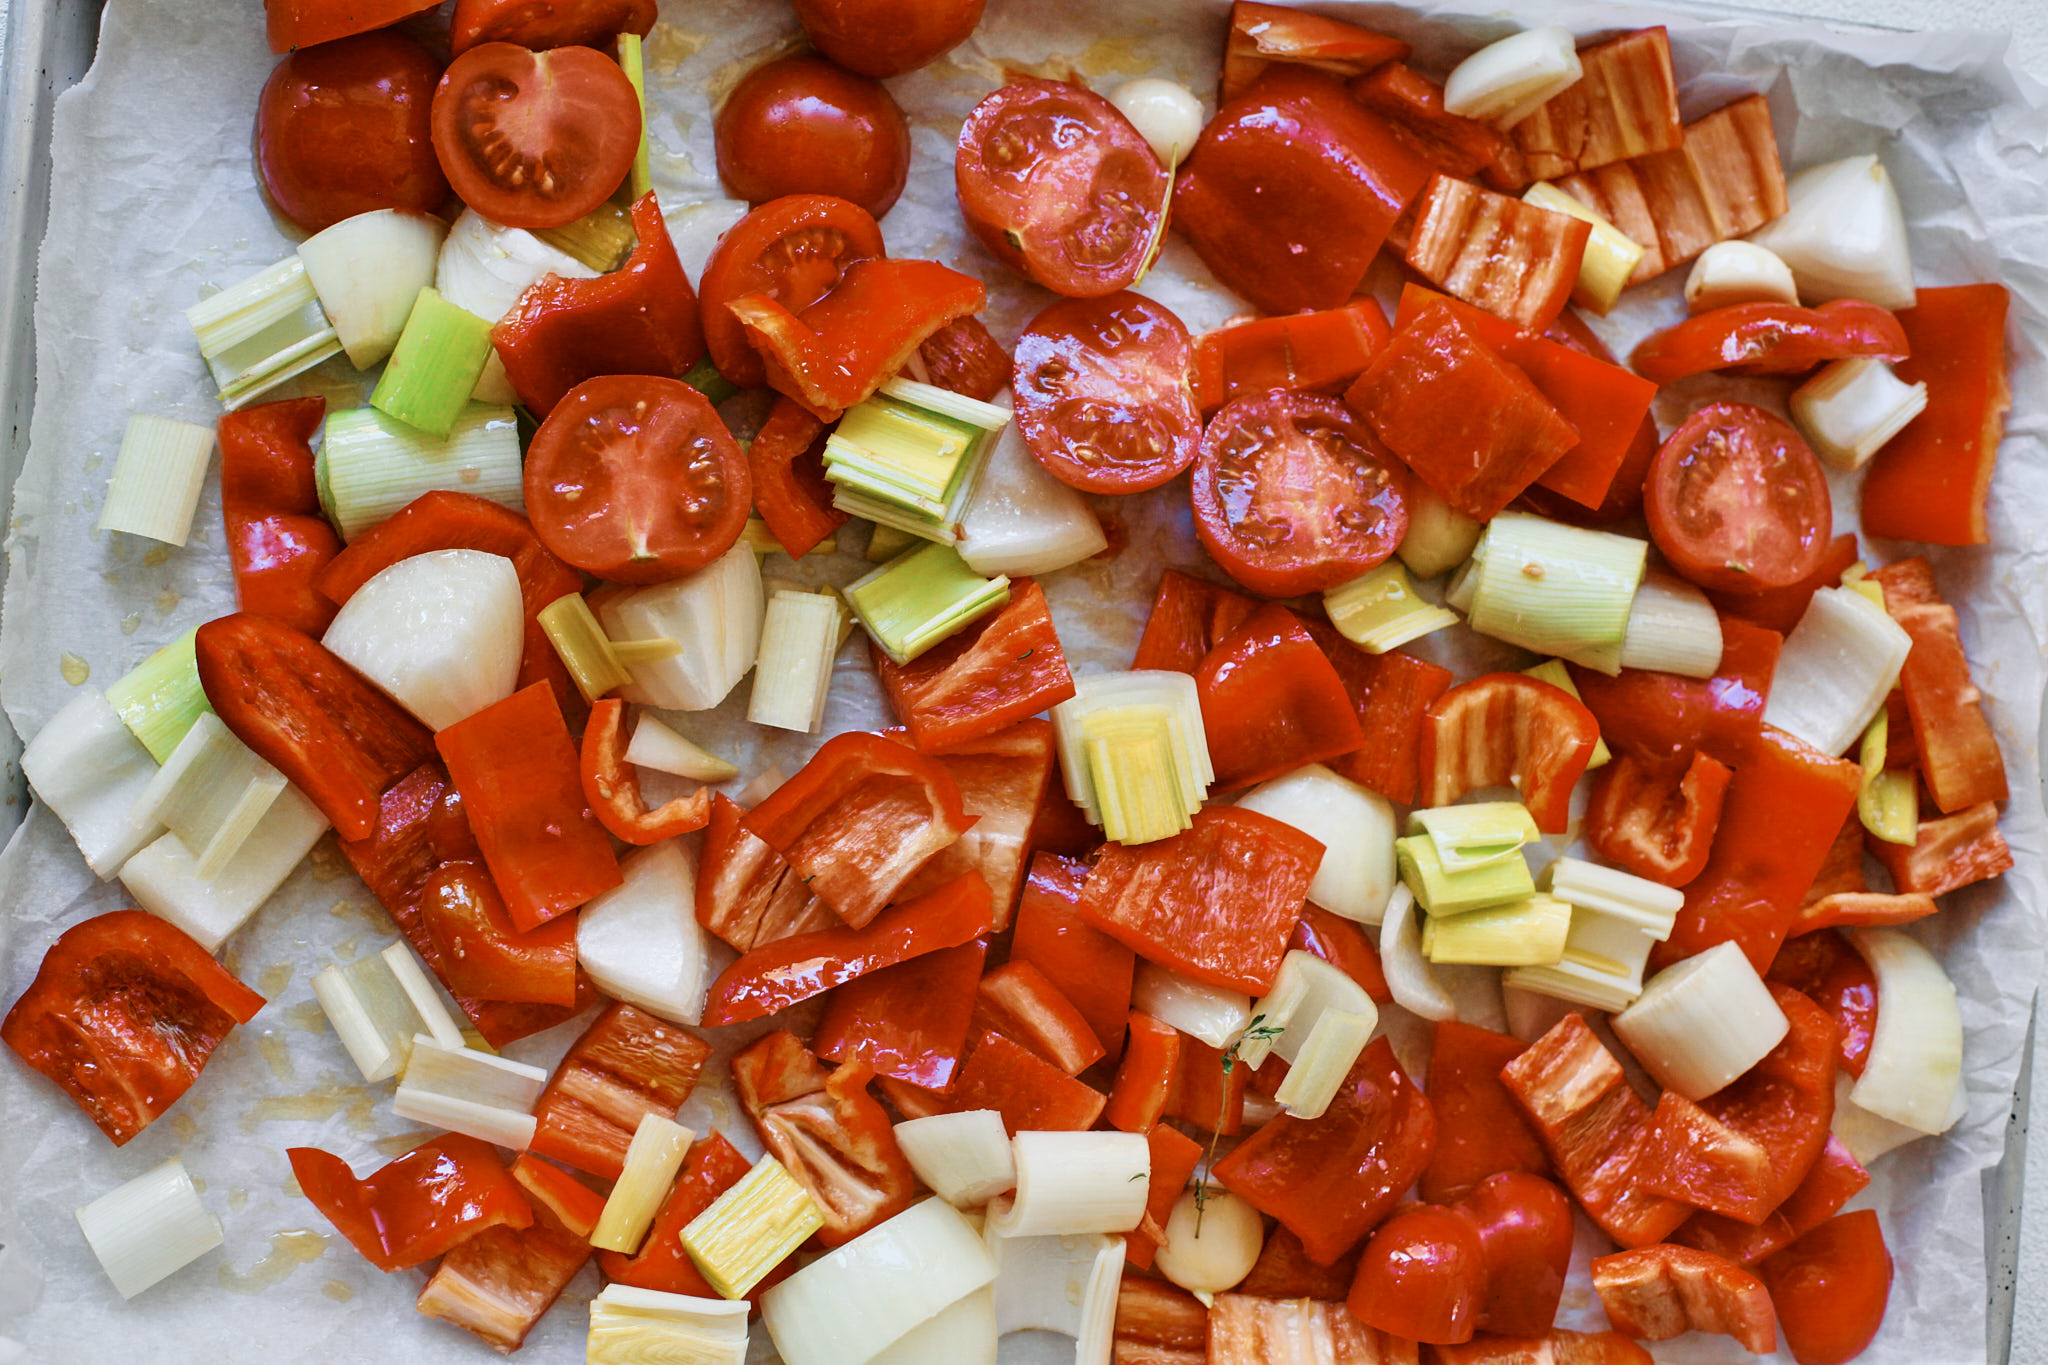 chopped red peppers, leeks, tomatoes, garlic and onion